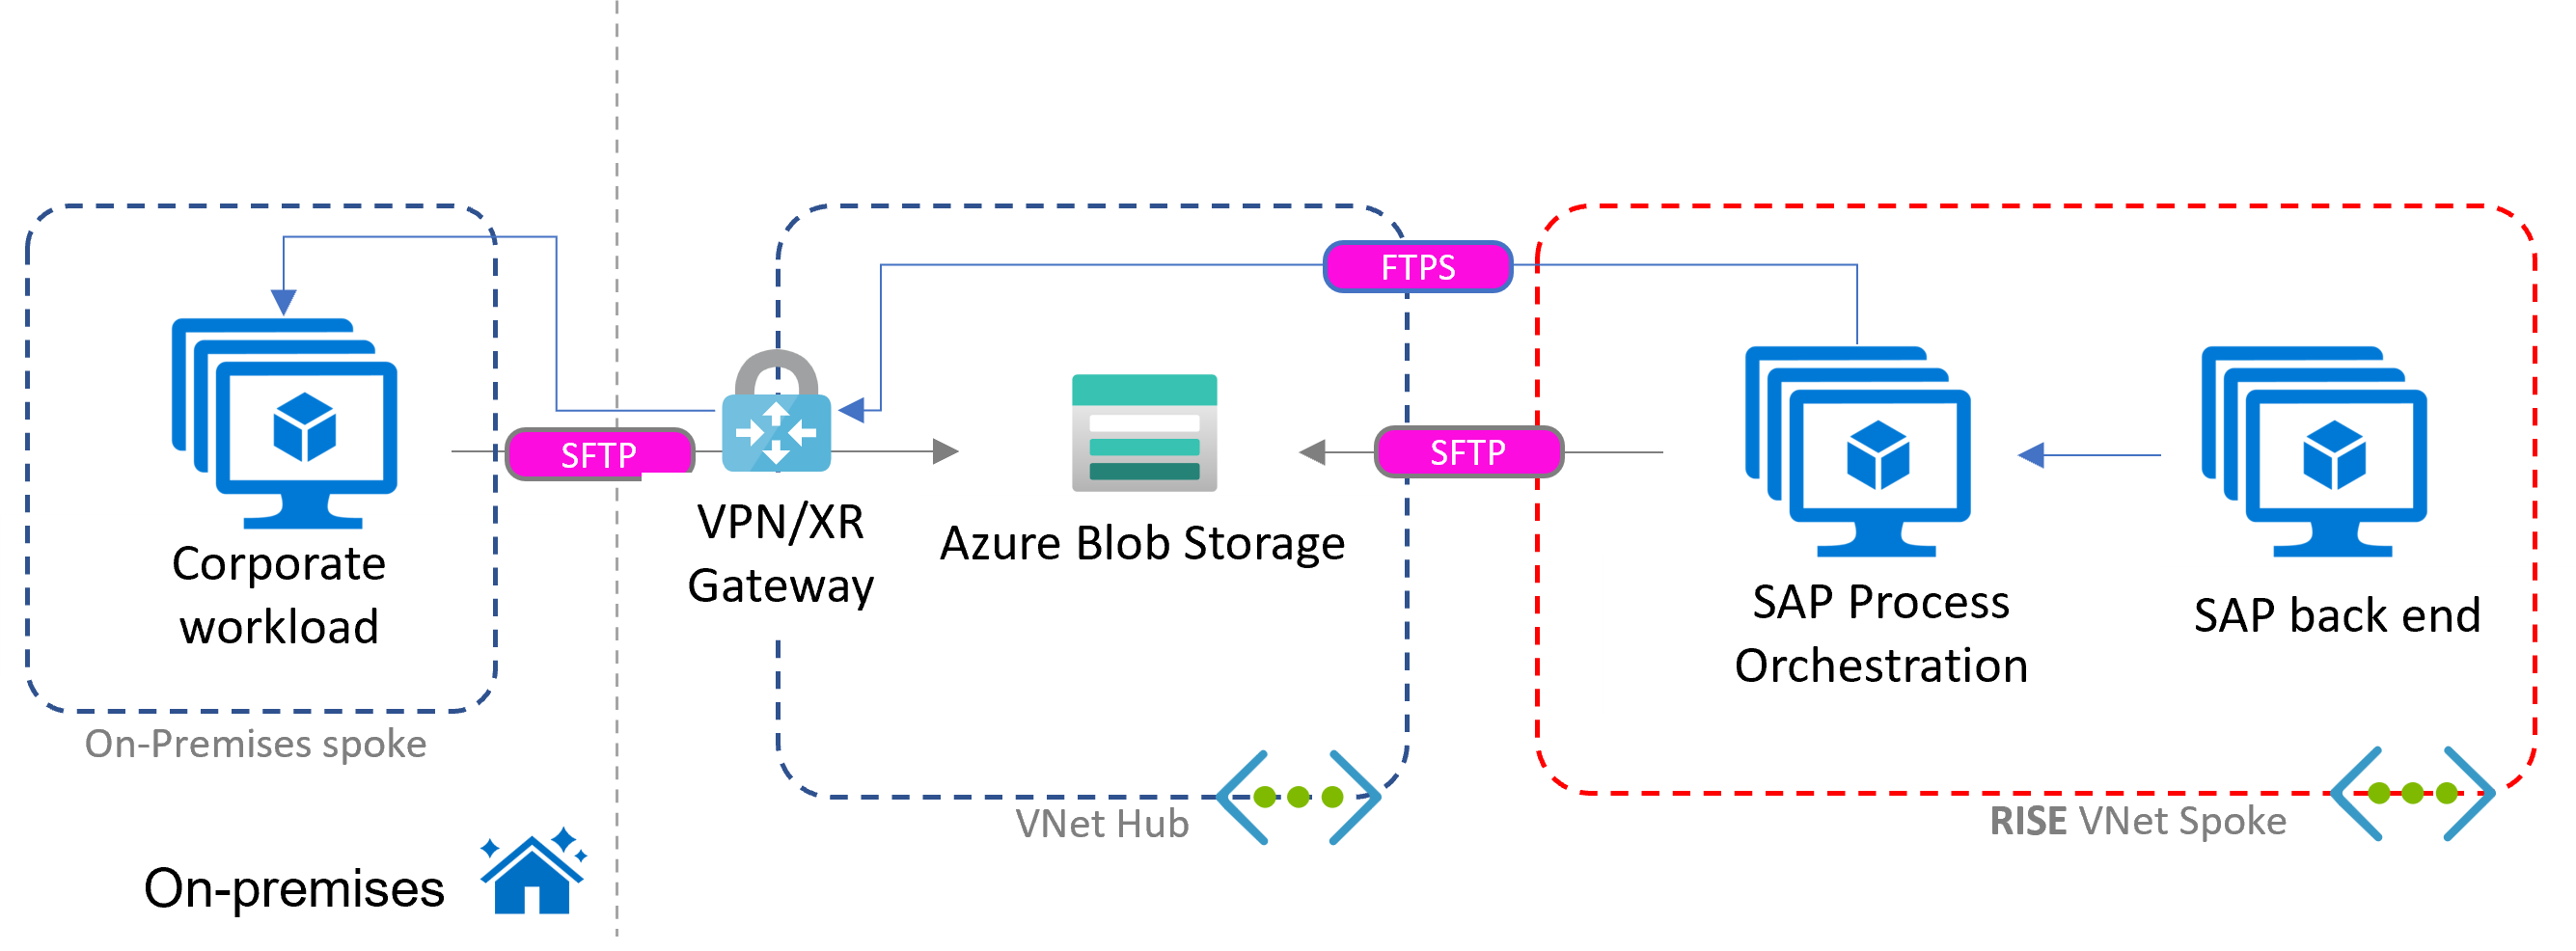 Diagram that shows a file share scenario with SAP Process Orchestration on Azure in the RISE context.